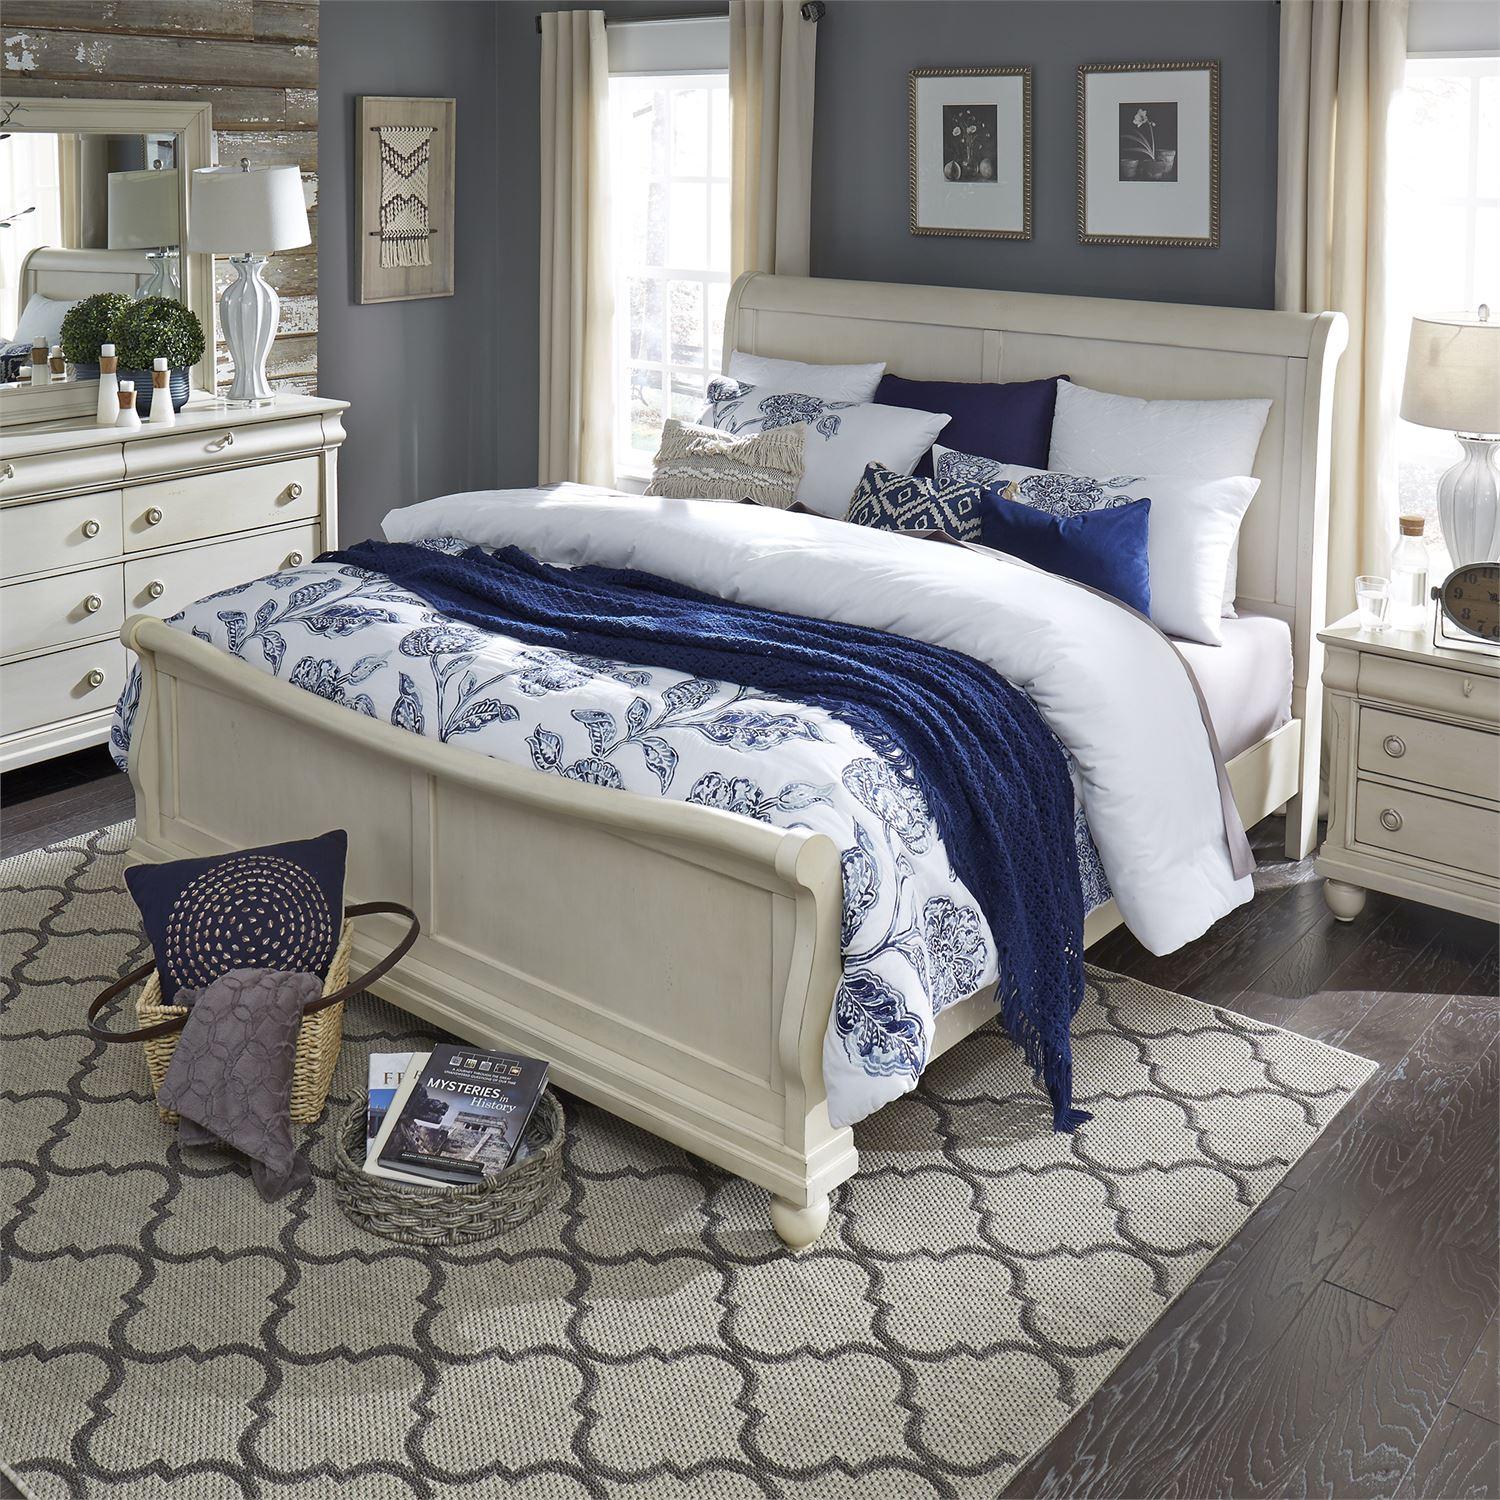 Traditional Sleigh Bedroom Set Rustic Traditions II  (689-BR) Sleigh Bedroom Set 689-BR-QSLDMN in White 